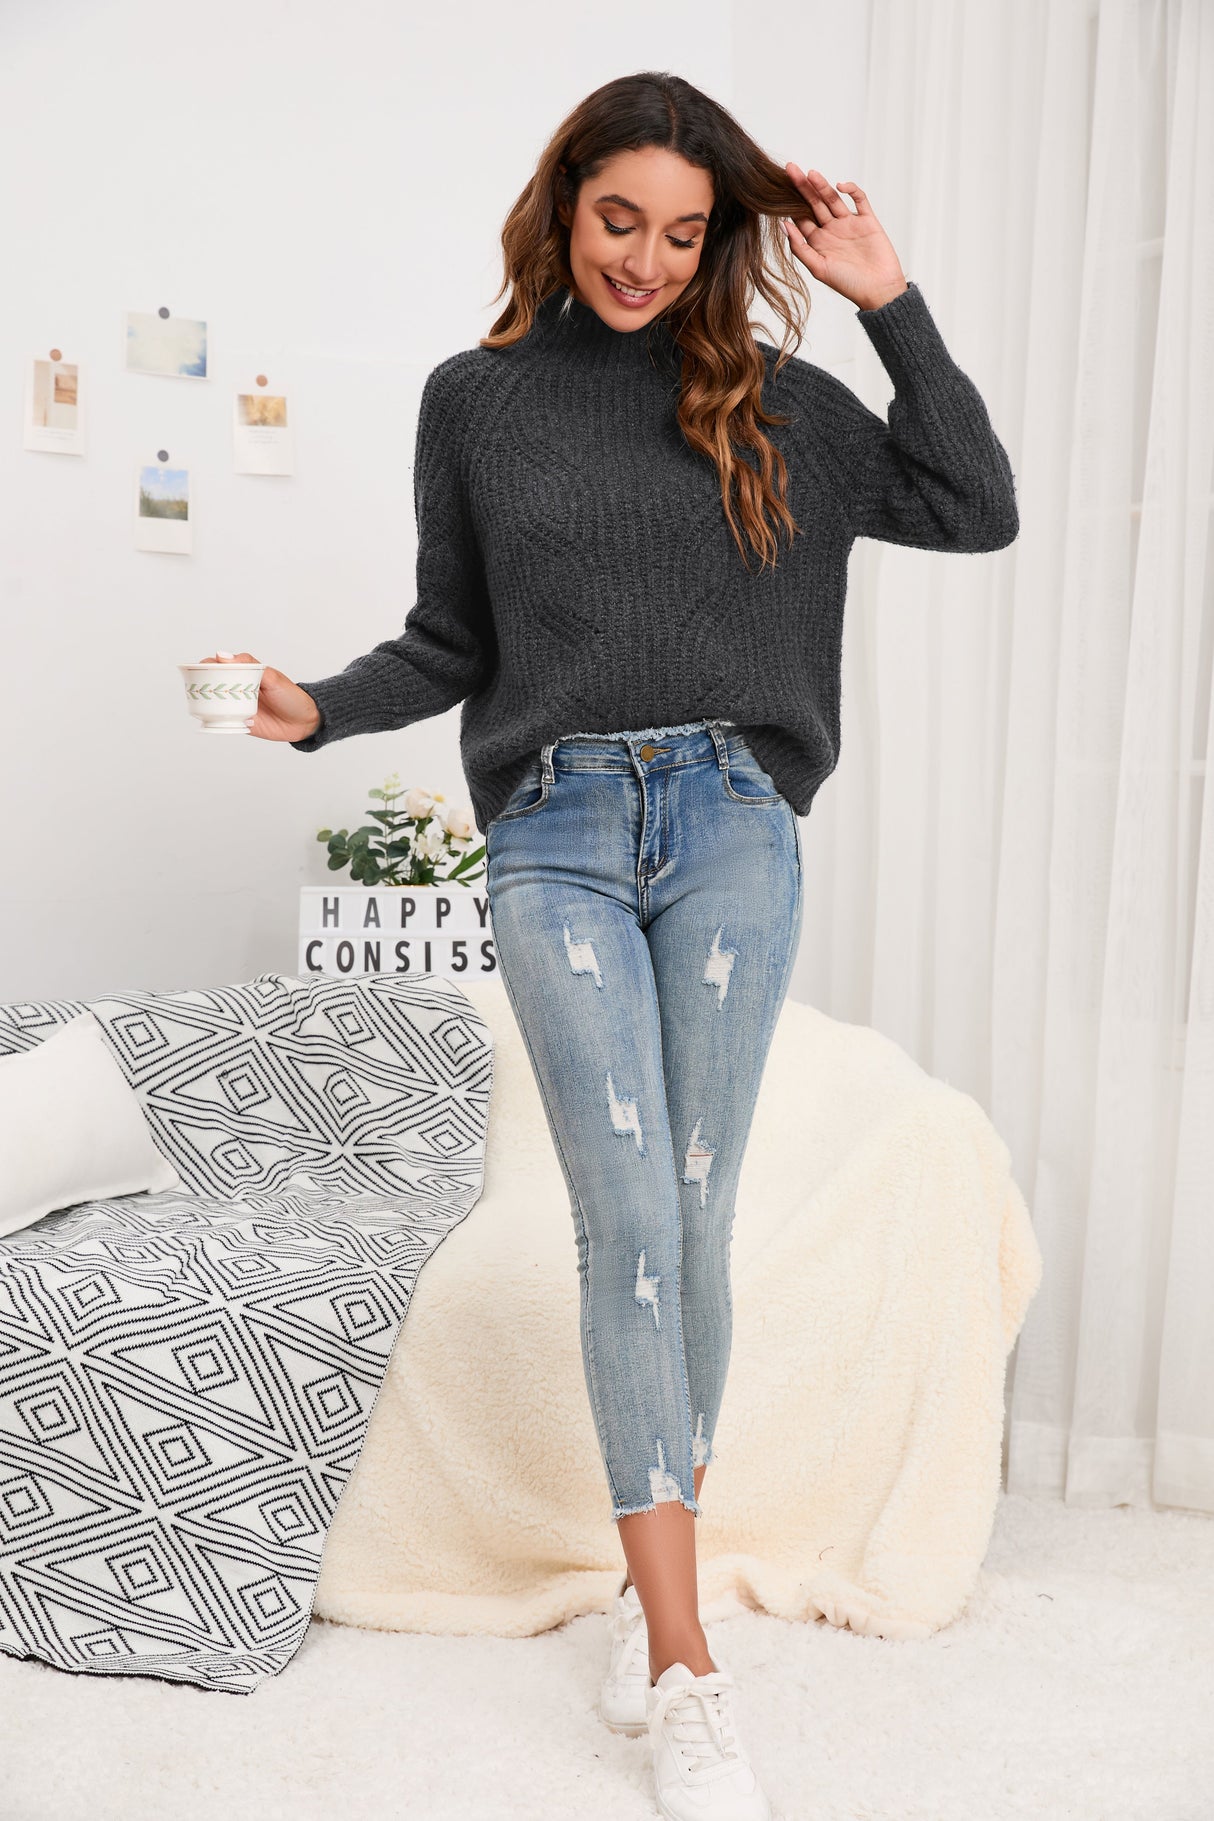 Women's Cotton Mock Neck Pullover Cropped Ribbed Knit Sweater Dark Gray - GexWorldwide